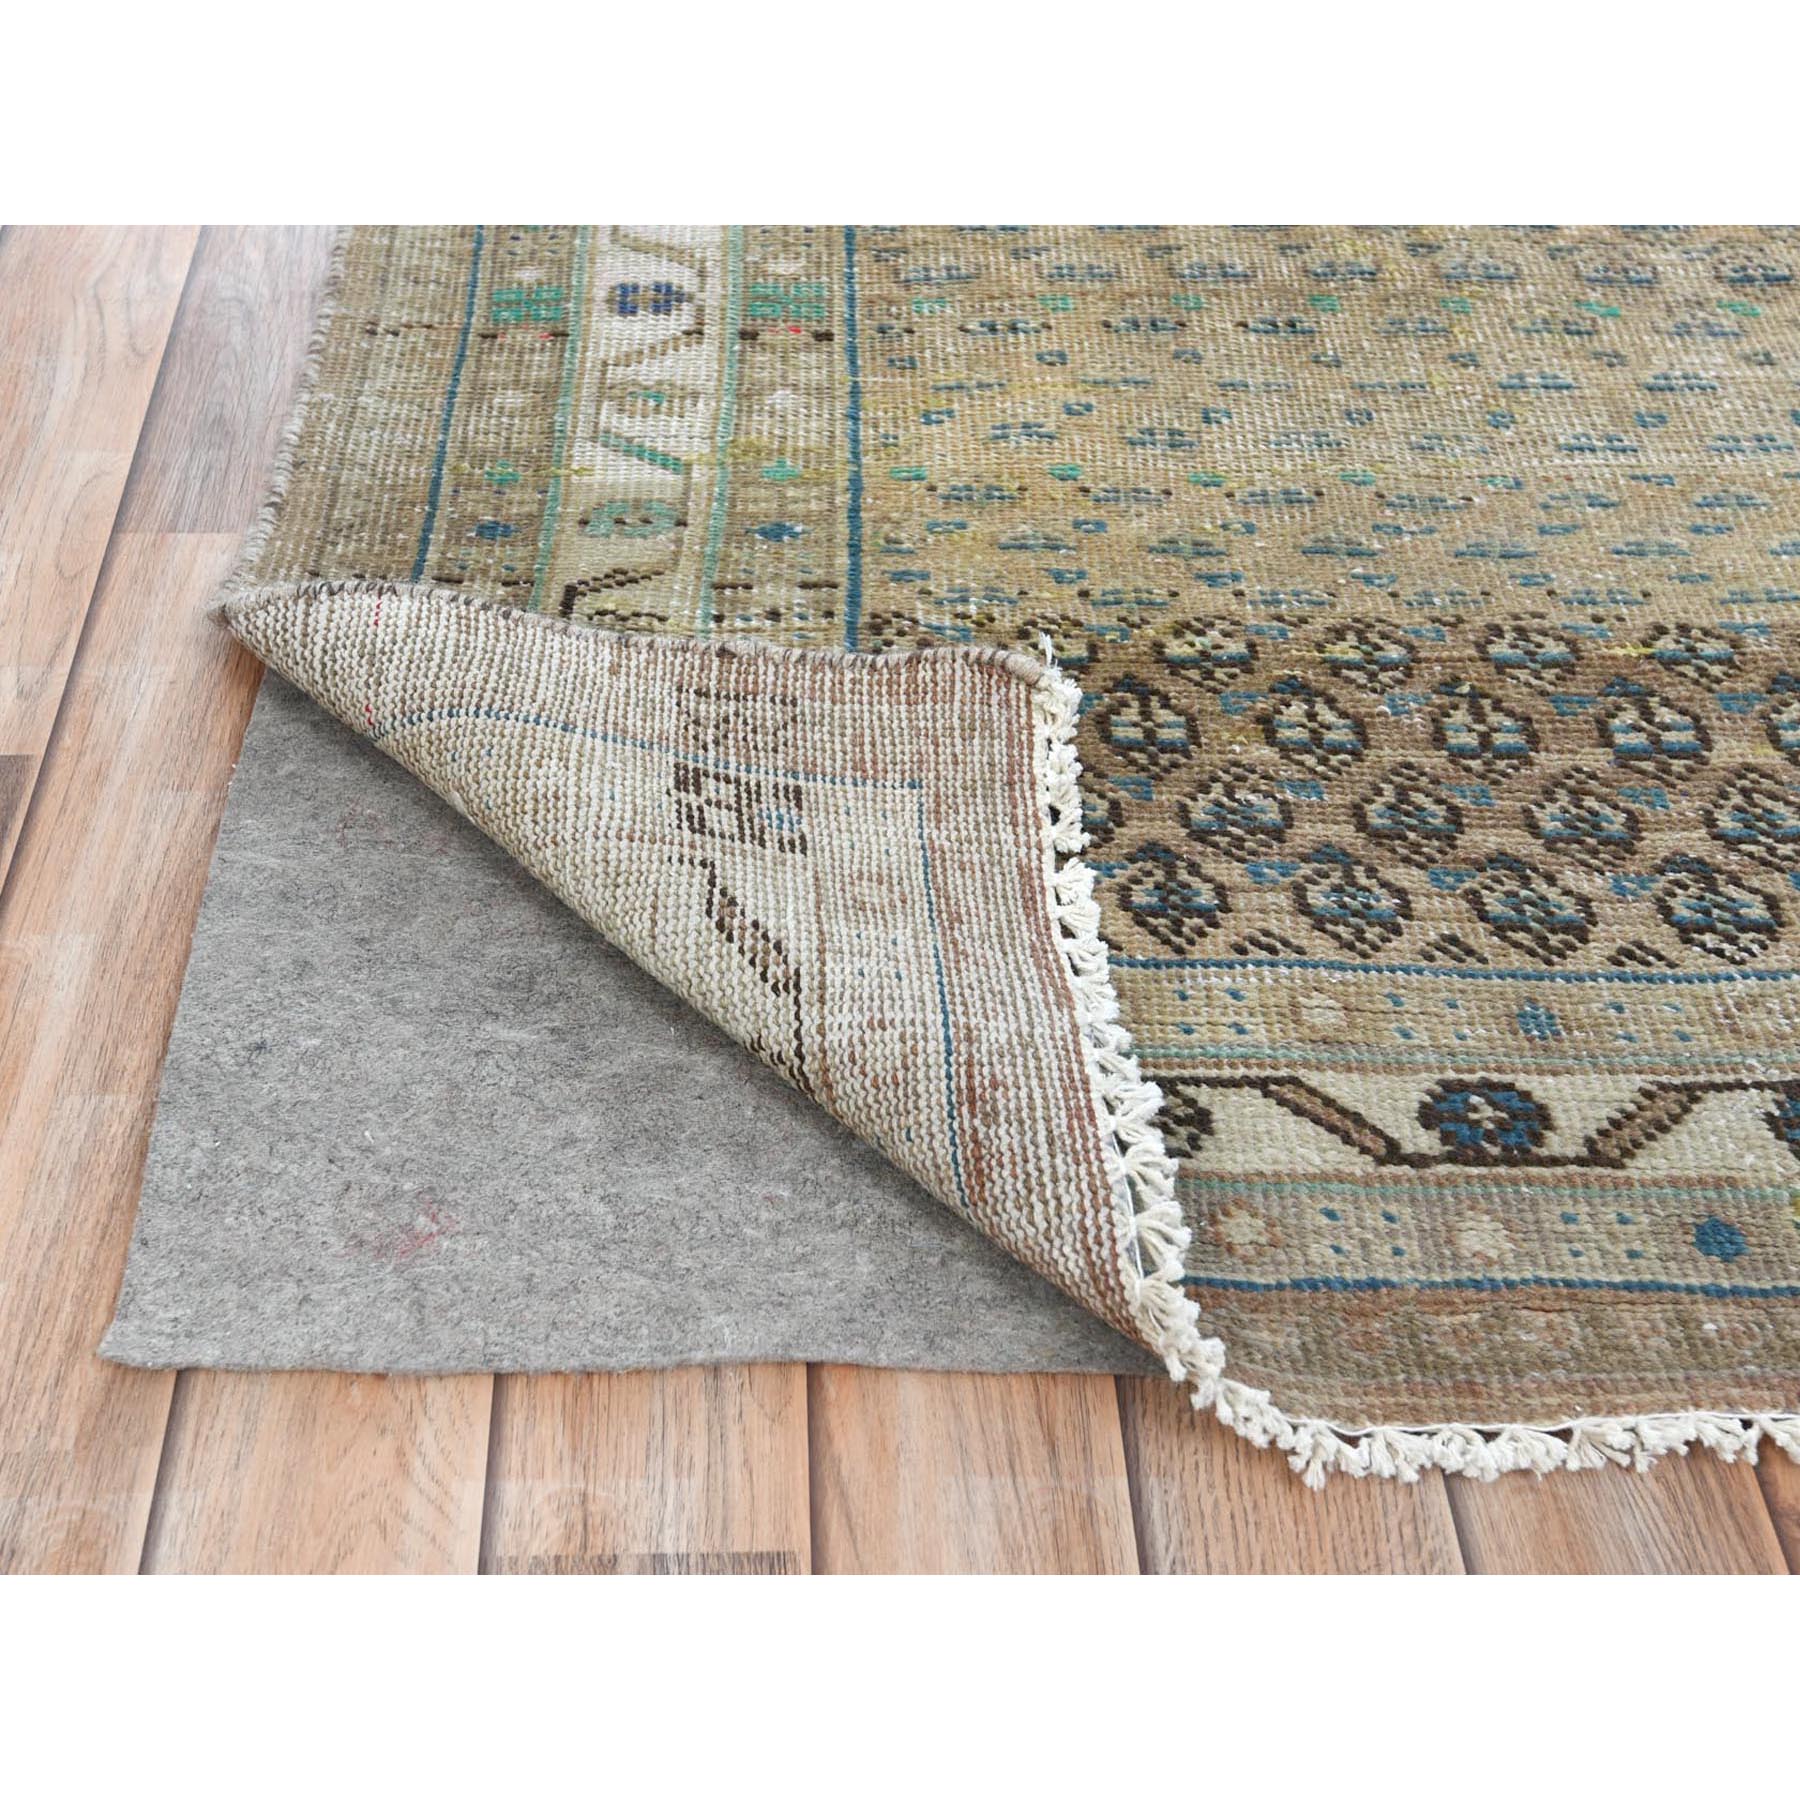 3'8"x11'10" Light Brown, Hand Woven Vintage Persian Serab Repetitive Boteh Design with Multiple Borders, Abrash, Worn Down, Distressed, Pure Wool Wide Runner Oriental Rug 